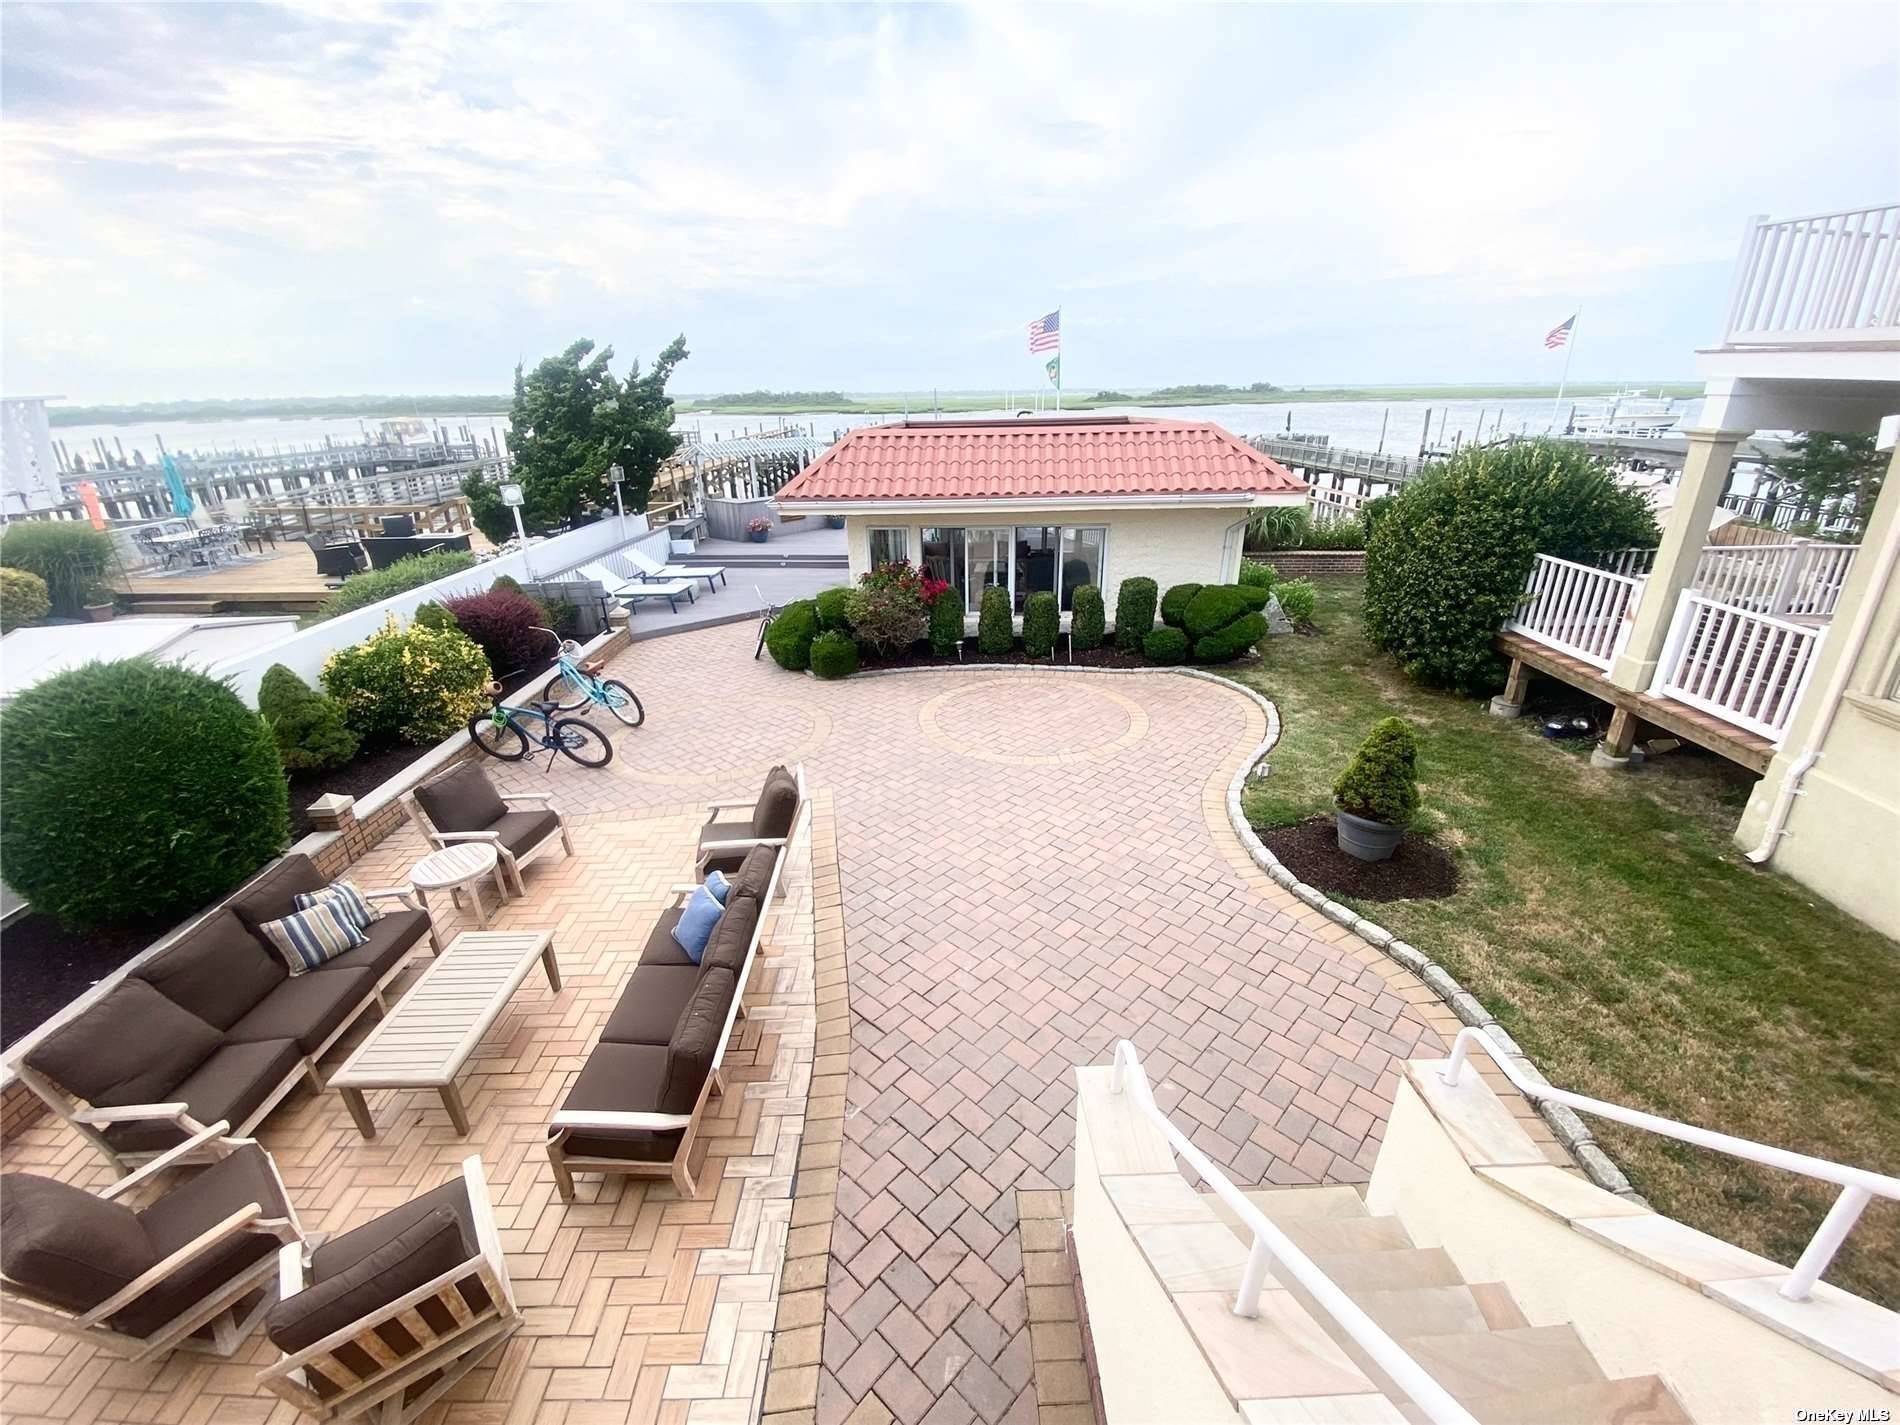 Beautiful Bayfront Home Offered For August Summer Rental Available 8 15 2024 9 15 2024 or Available Now as Off Season Rental Now Through May at 5, 000 Month.